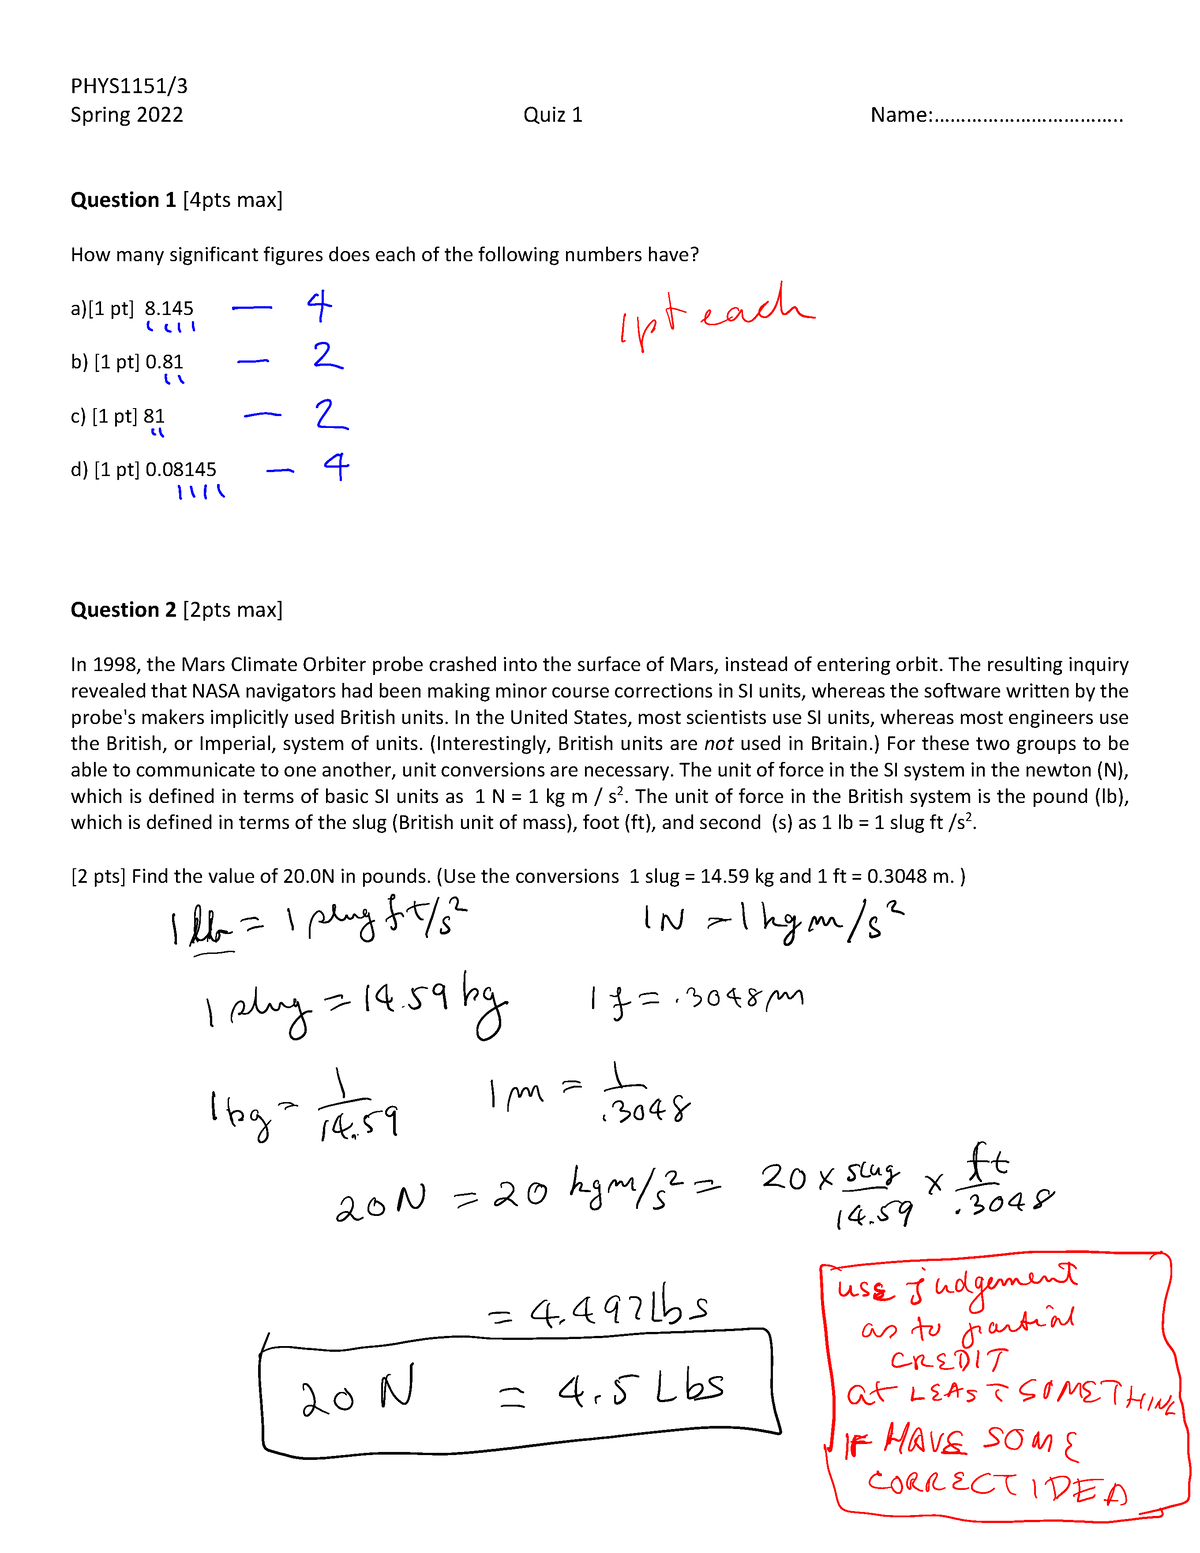 PHYS1153SP2-Q1-solved - PHYS1151/ Spring 2022 Quiz 1 Name